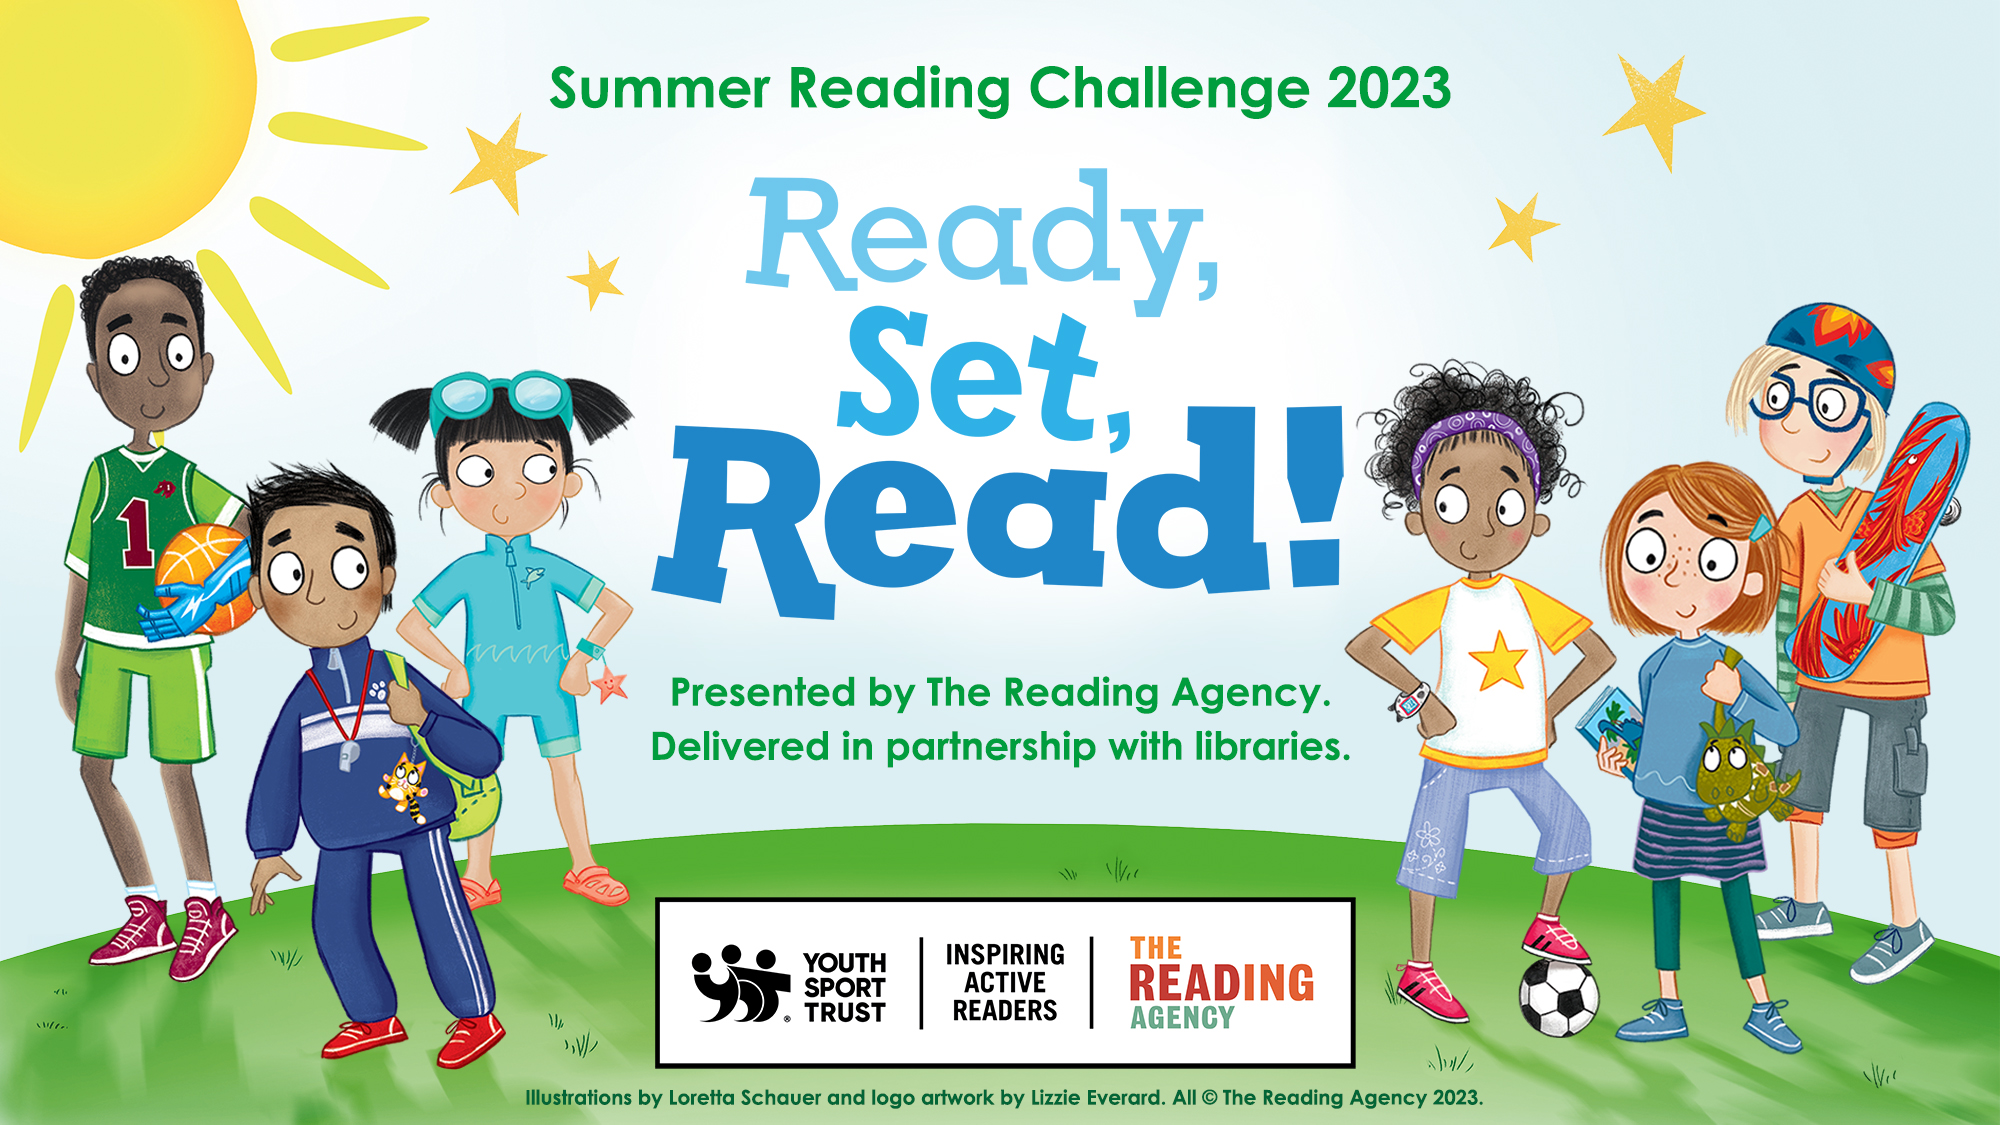 The image carries the text "Summer Reading Challenge 2023. Ready, Set, Read! Presented by the Reading Agency. Delivered in partnership with libraries." The logos of the Youth Sports Trust and the Reading Agency are below with the strapline Inspiring Active Readers. The backdrop is of the sun and stars behind the six cartoon characters of the challenge, Alesha, Naveen, Naomi, Noah, Ollie and Sophie. The characters are Black, Asian, Chinese and White in appearance and include one with a prosthetic arm and one that wears glasses. The characters are ready for basketball, swimming, athletics, football, skateboarding and board games. Illustrations are by Loretta Schauer and logos by Lizzie Everard, both are copyright of the Reading Agency.